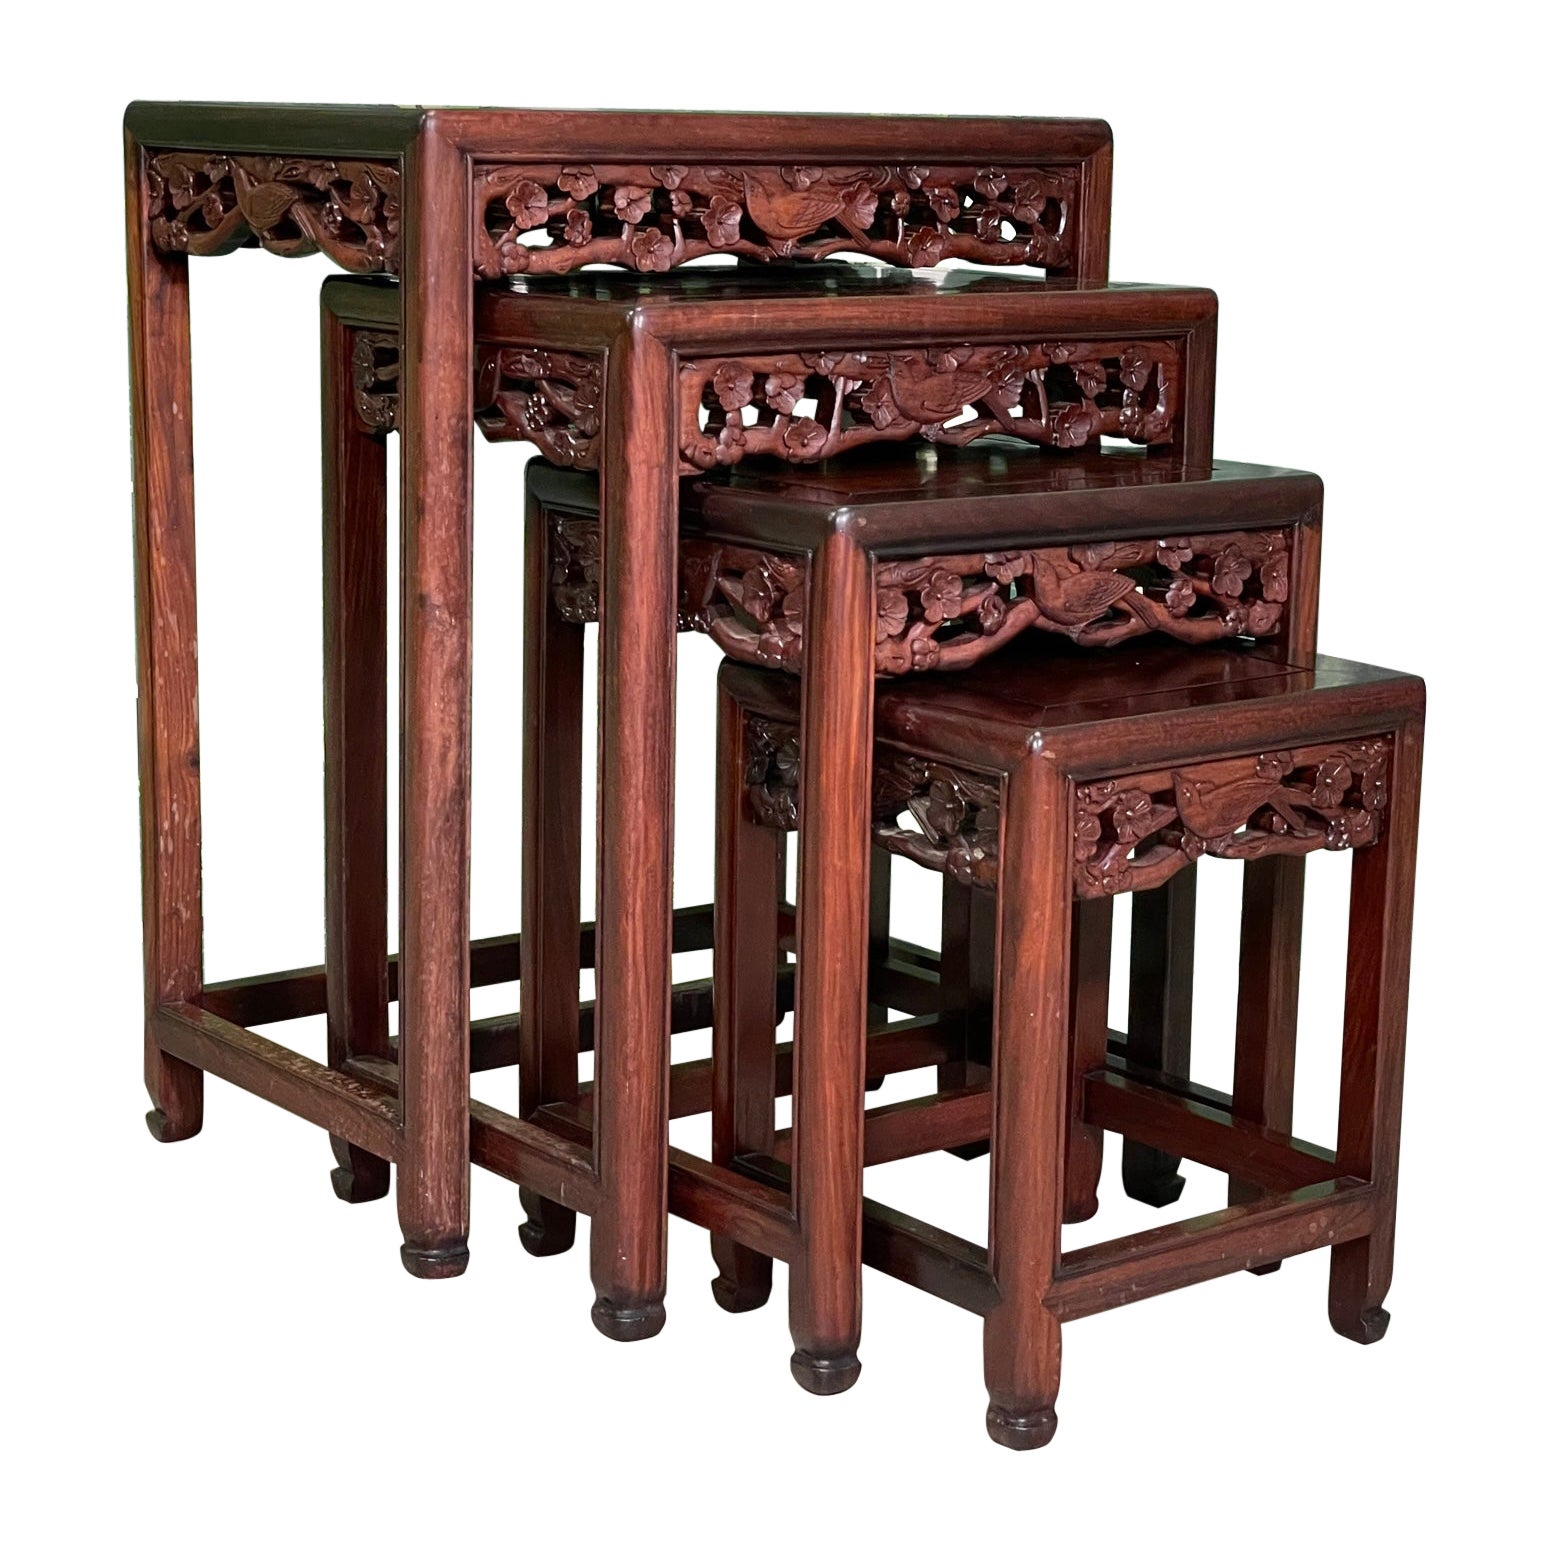 Asian Hand Carved Rosewood Nesting Tables or Stacking Tables, Set of 4